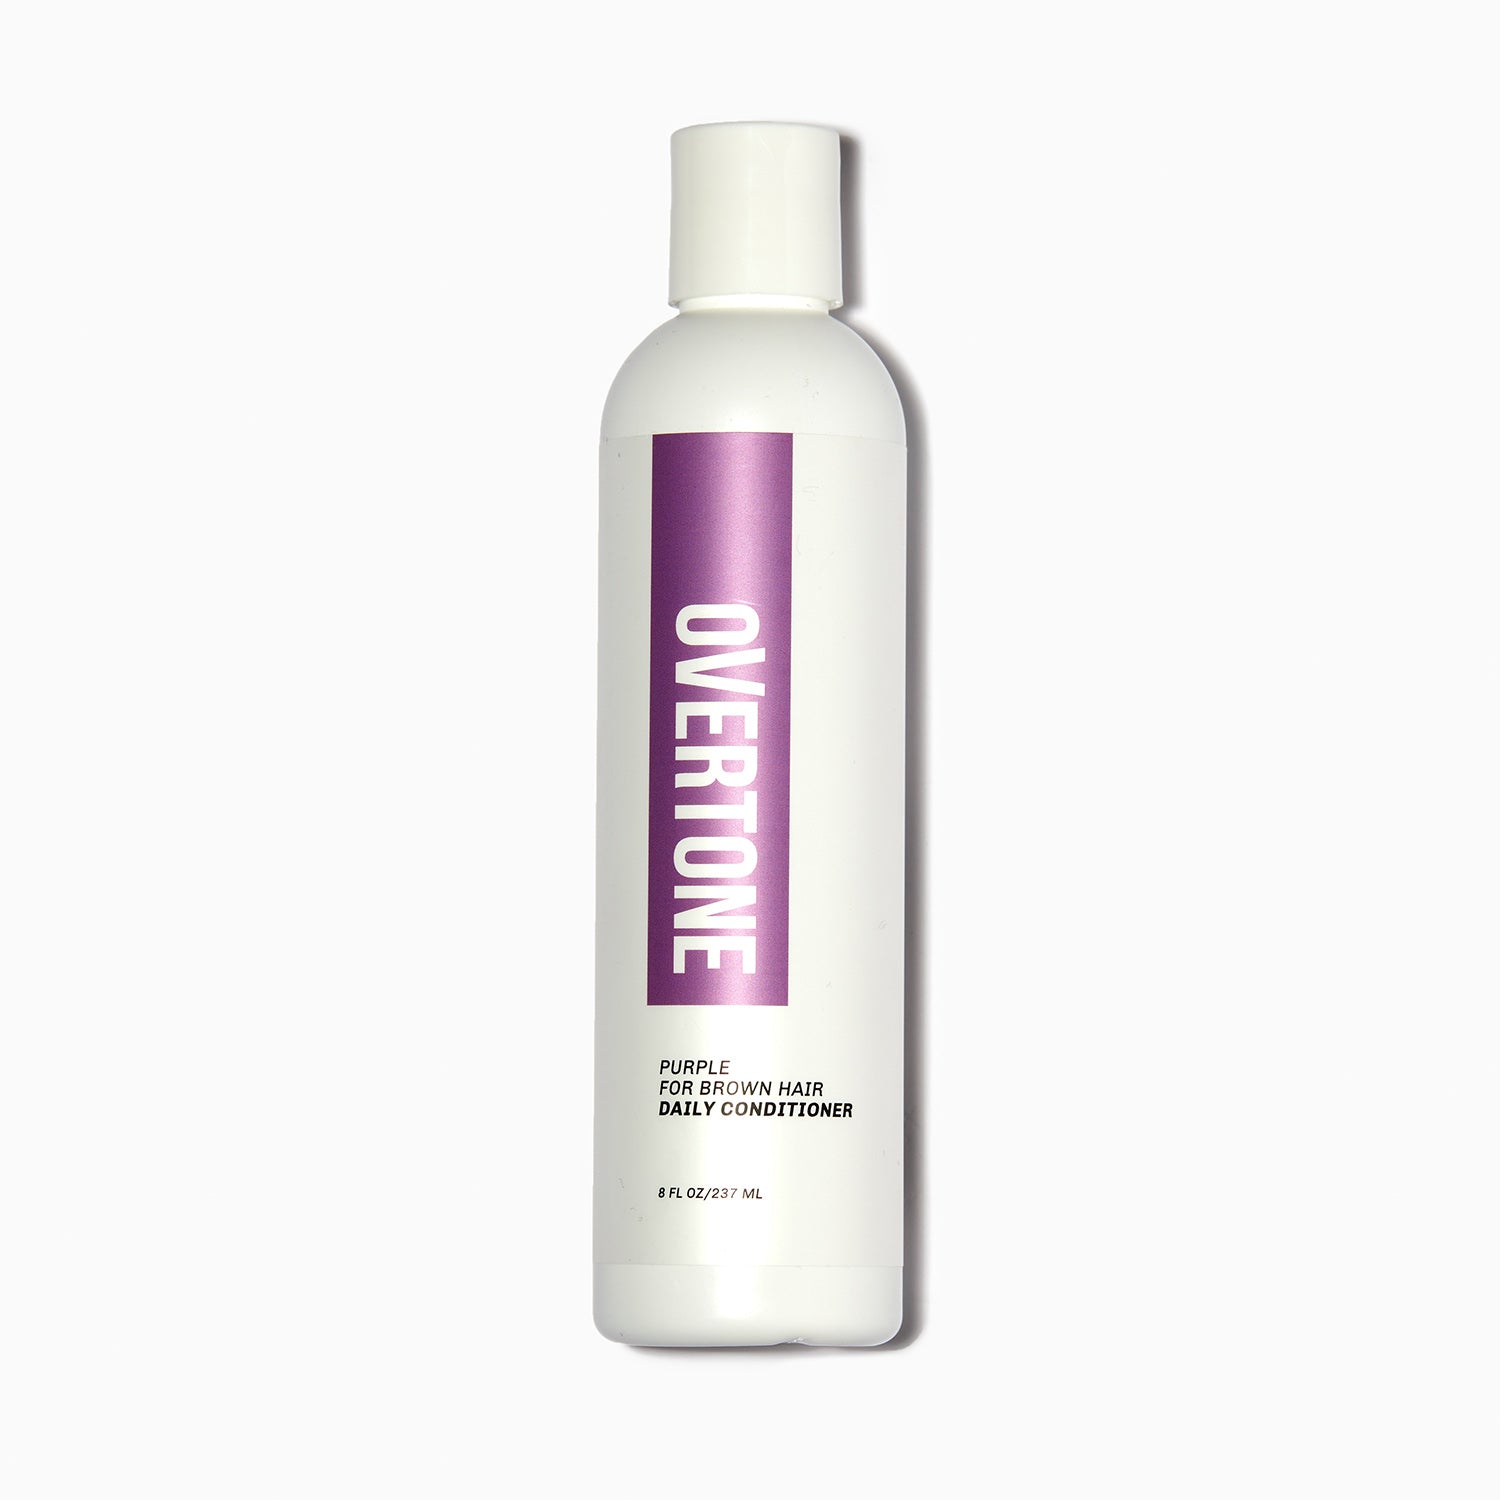 oVertone Purple for Brown Hair Daily Conditioner